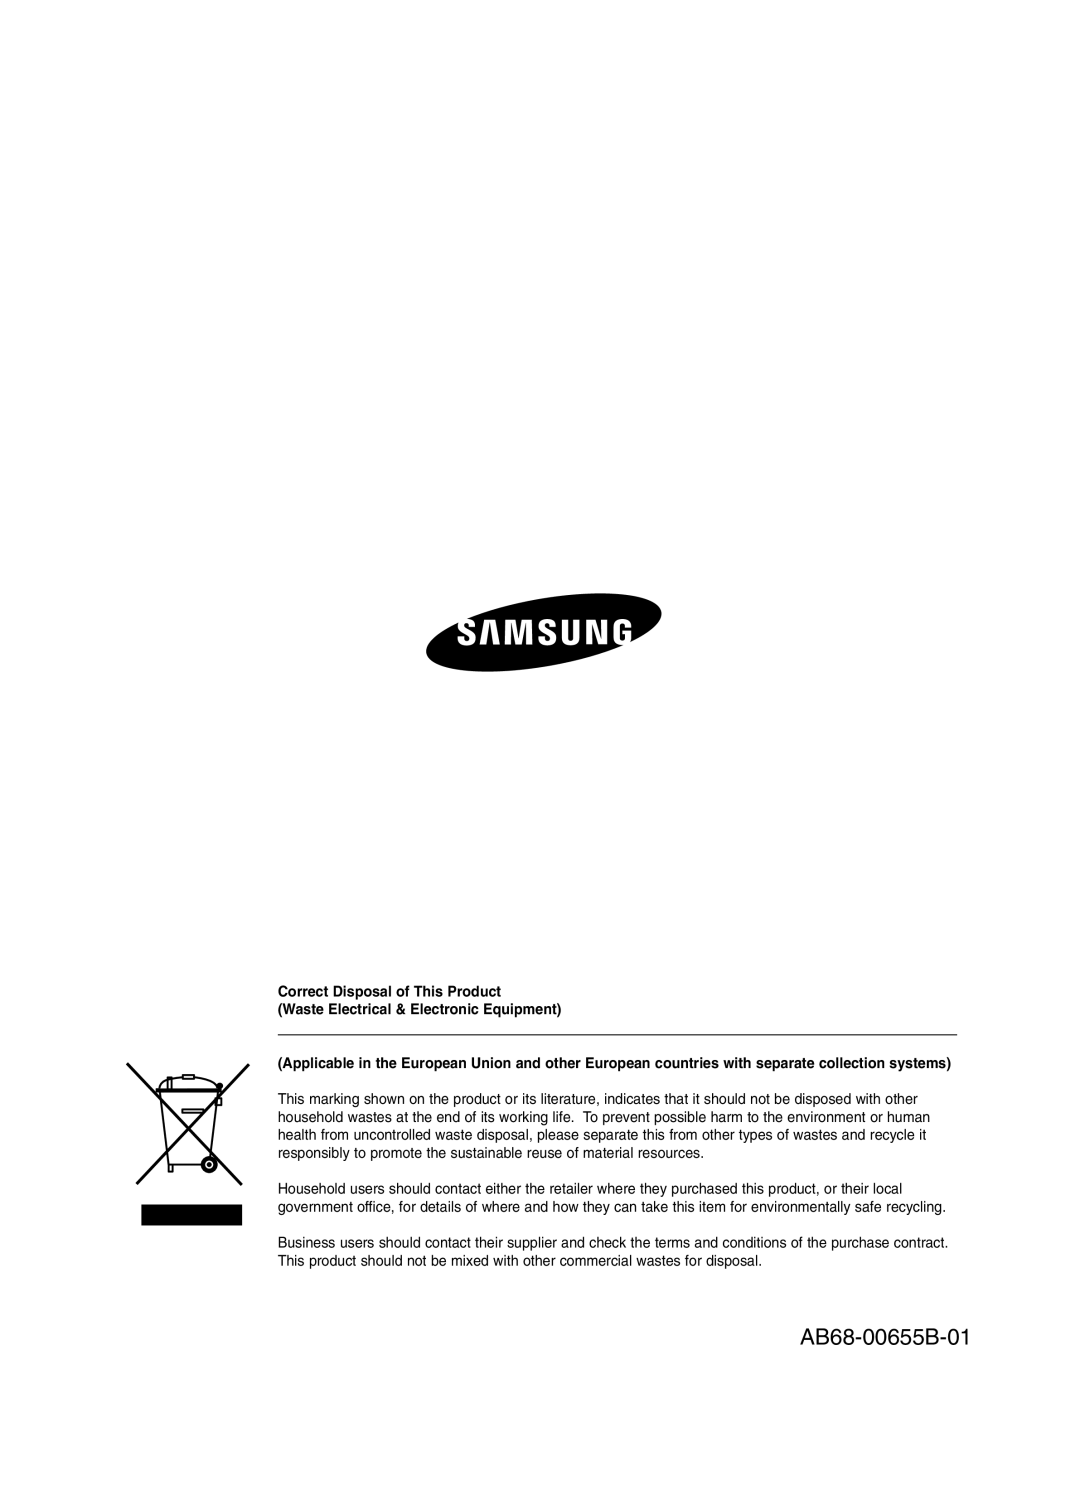 Samsung SHR-2042P250 manual AB68-00655B-01, Correct Disposal of This Product, Waste Electrical & Electronic Equipment 